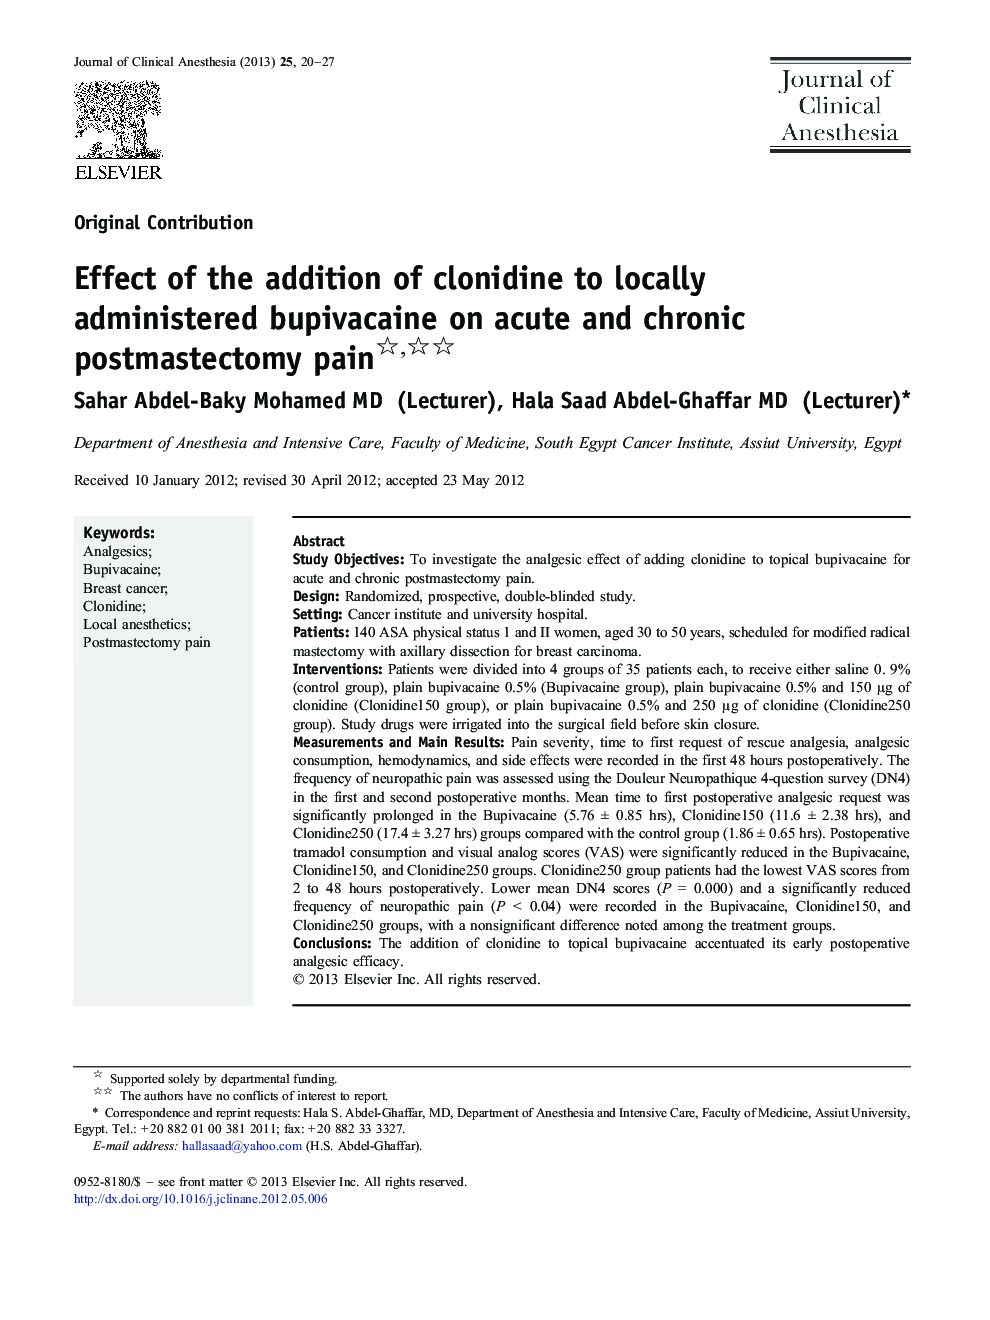 Effect of the addition of clonidine to locally administered bupivacaine on acute and chronic postmastectomy pain 